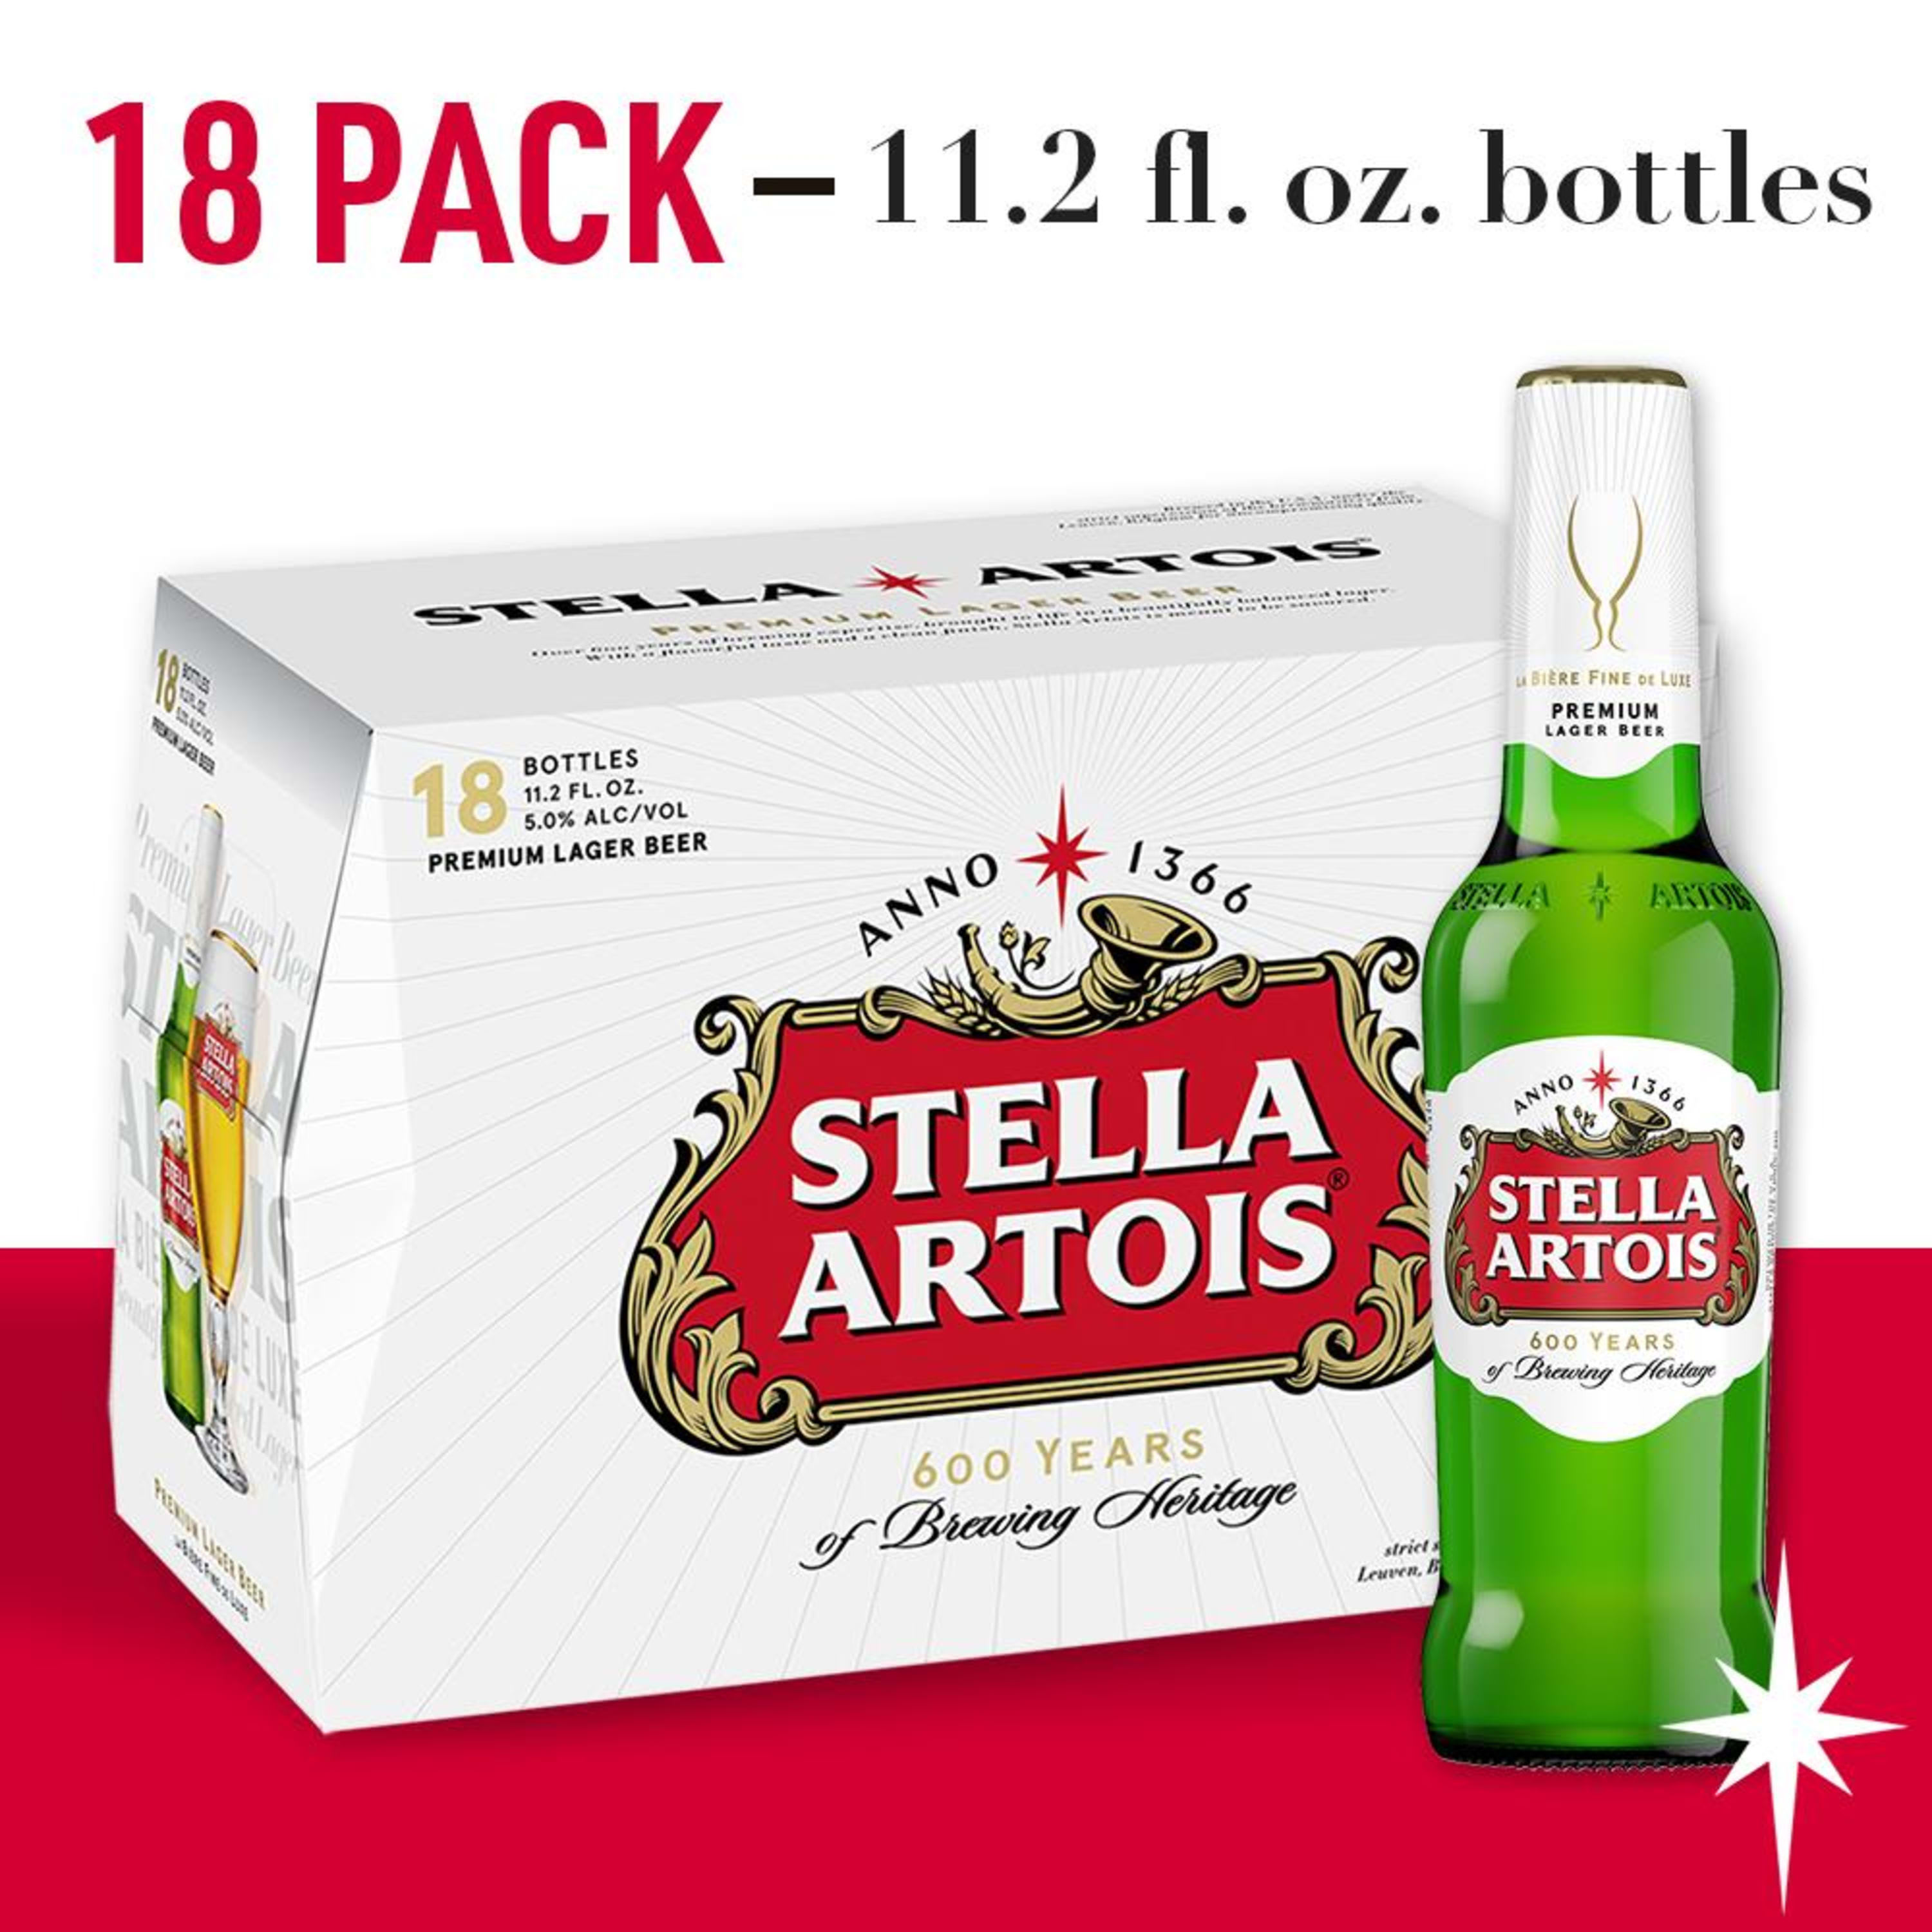 A package of Stella Artois and a sample green-colored bottle of Stella Artois